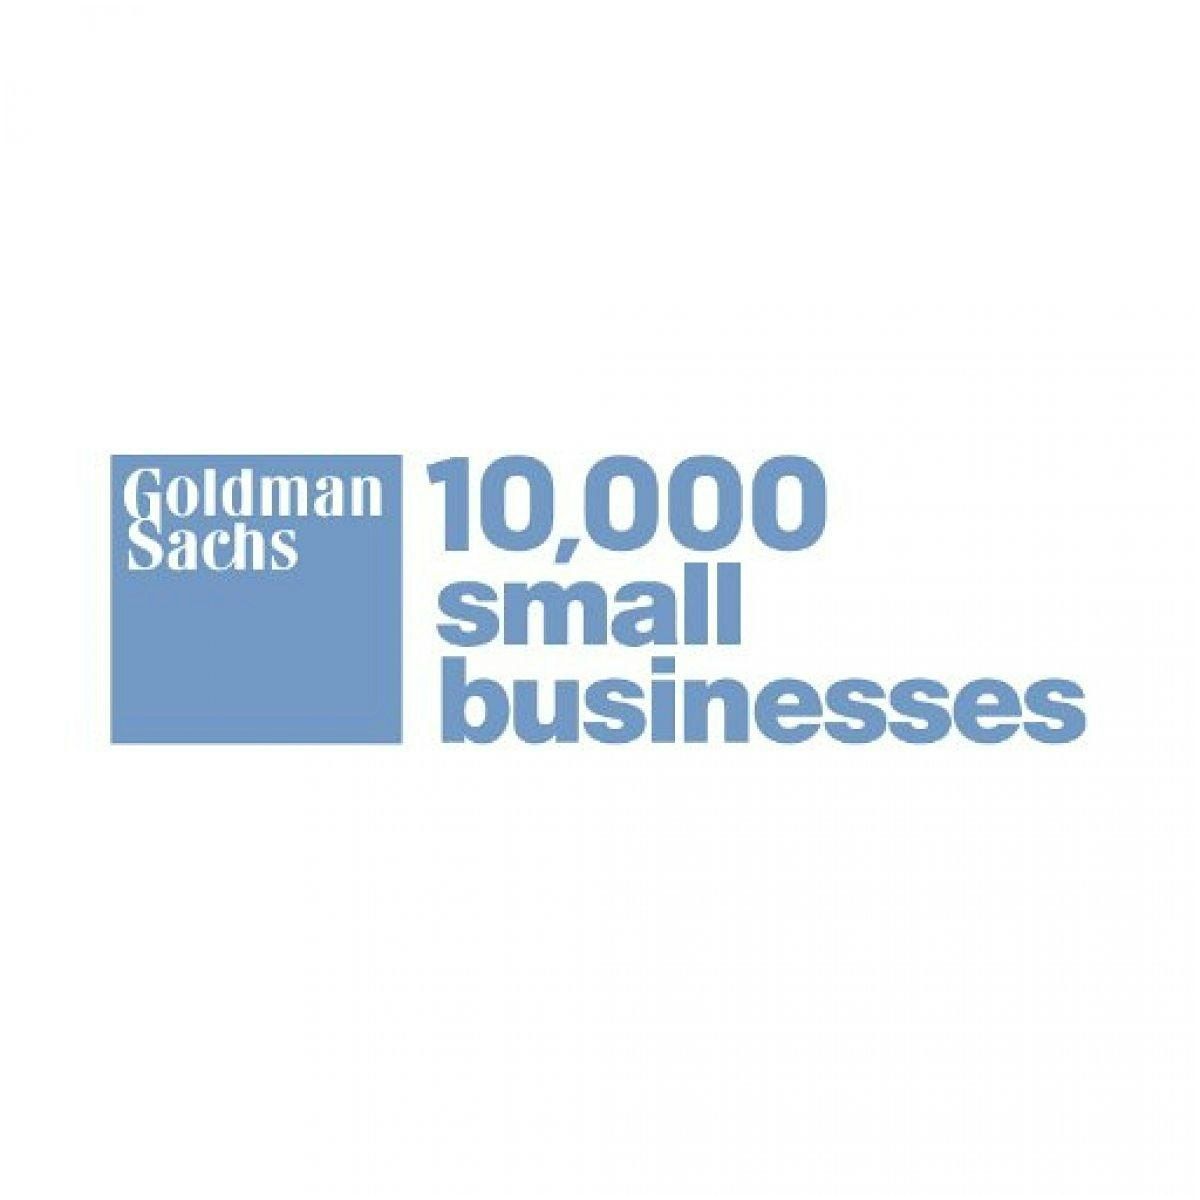 Goldman Sachs 10,000 Small Businesses Open House